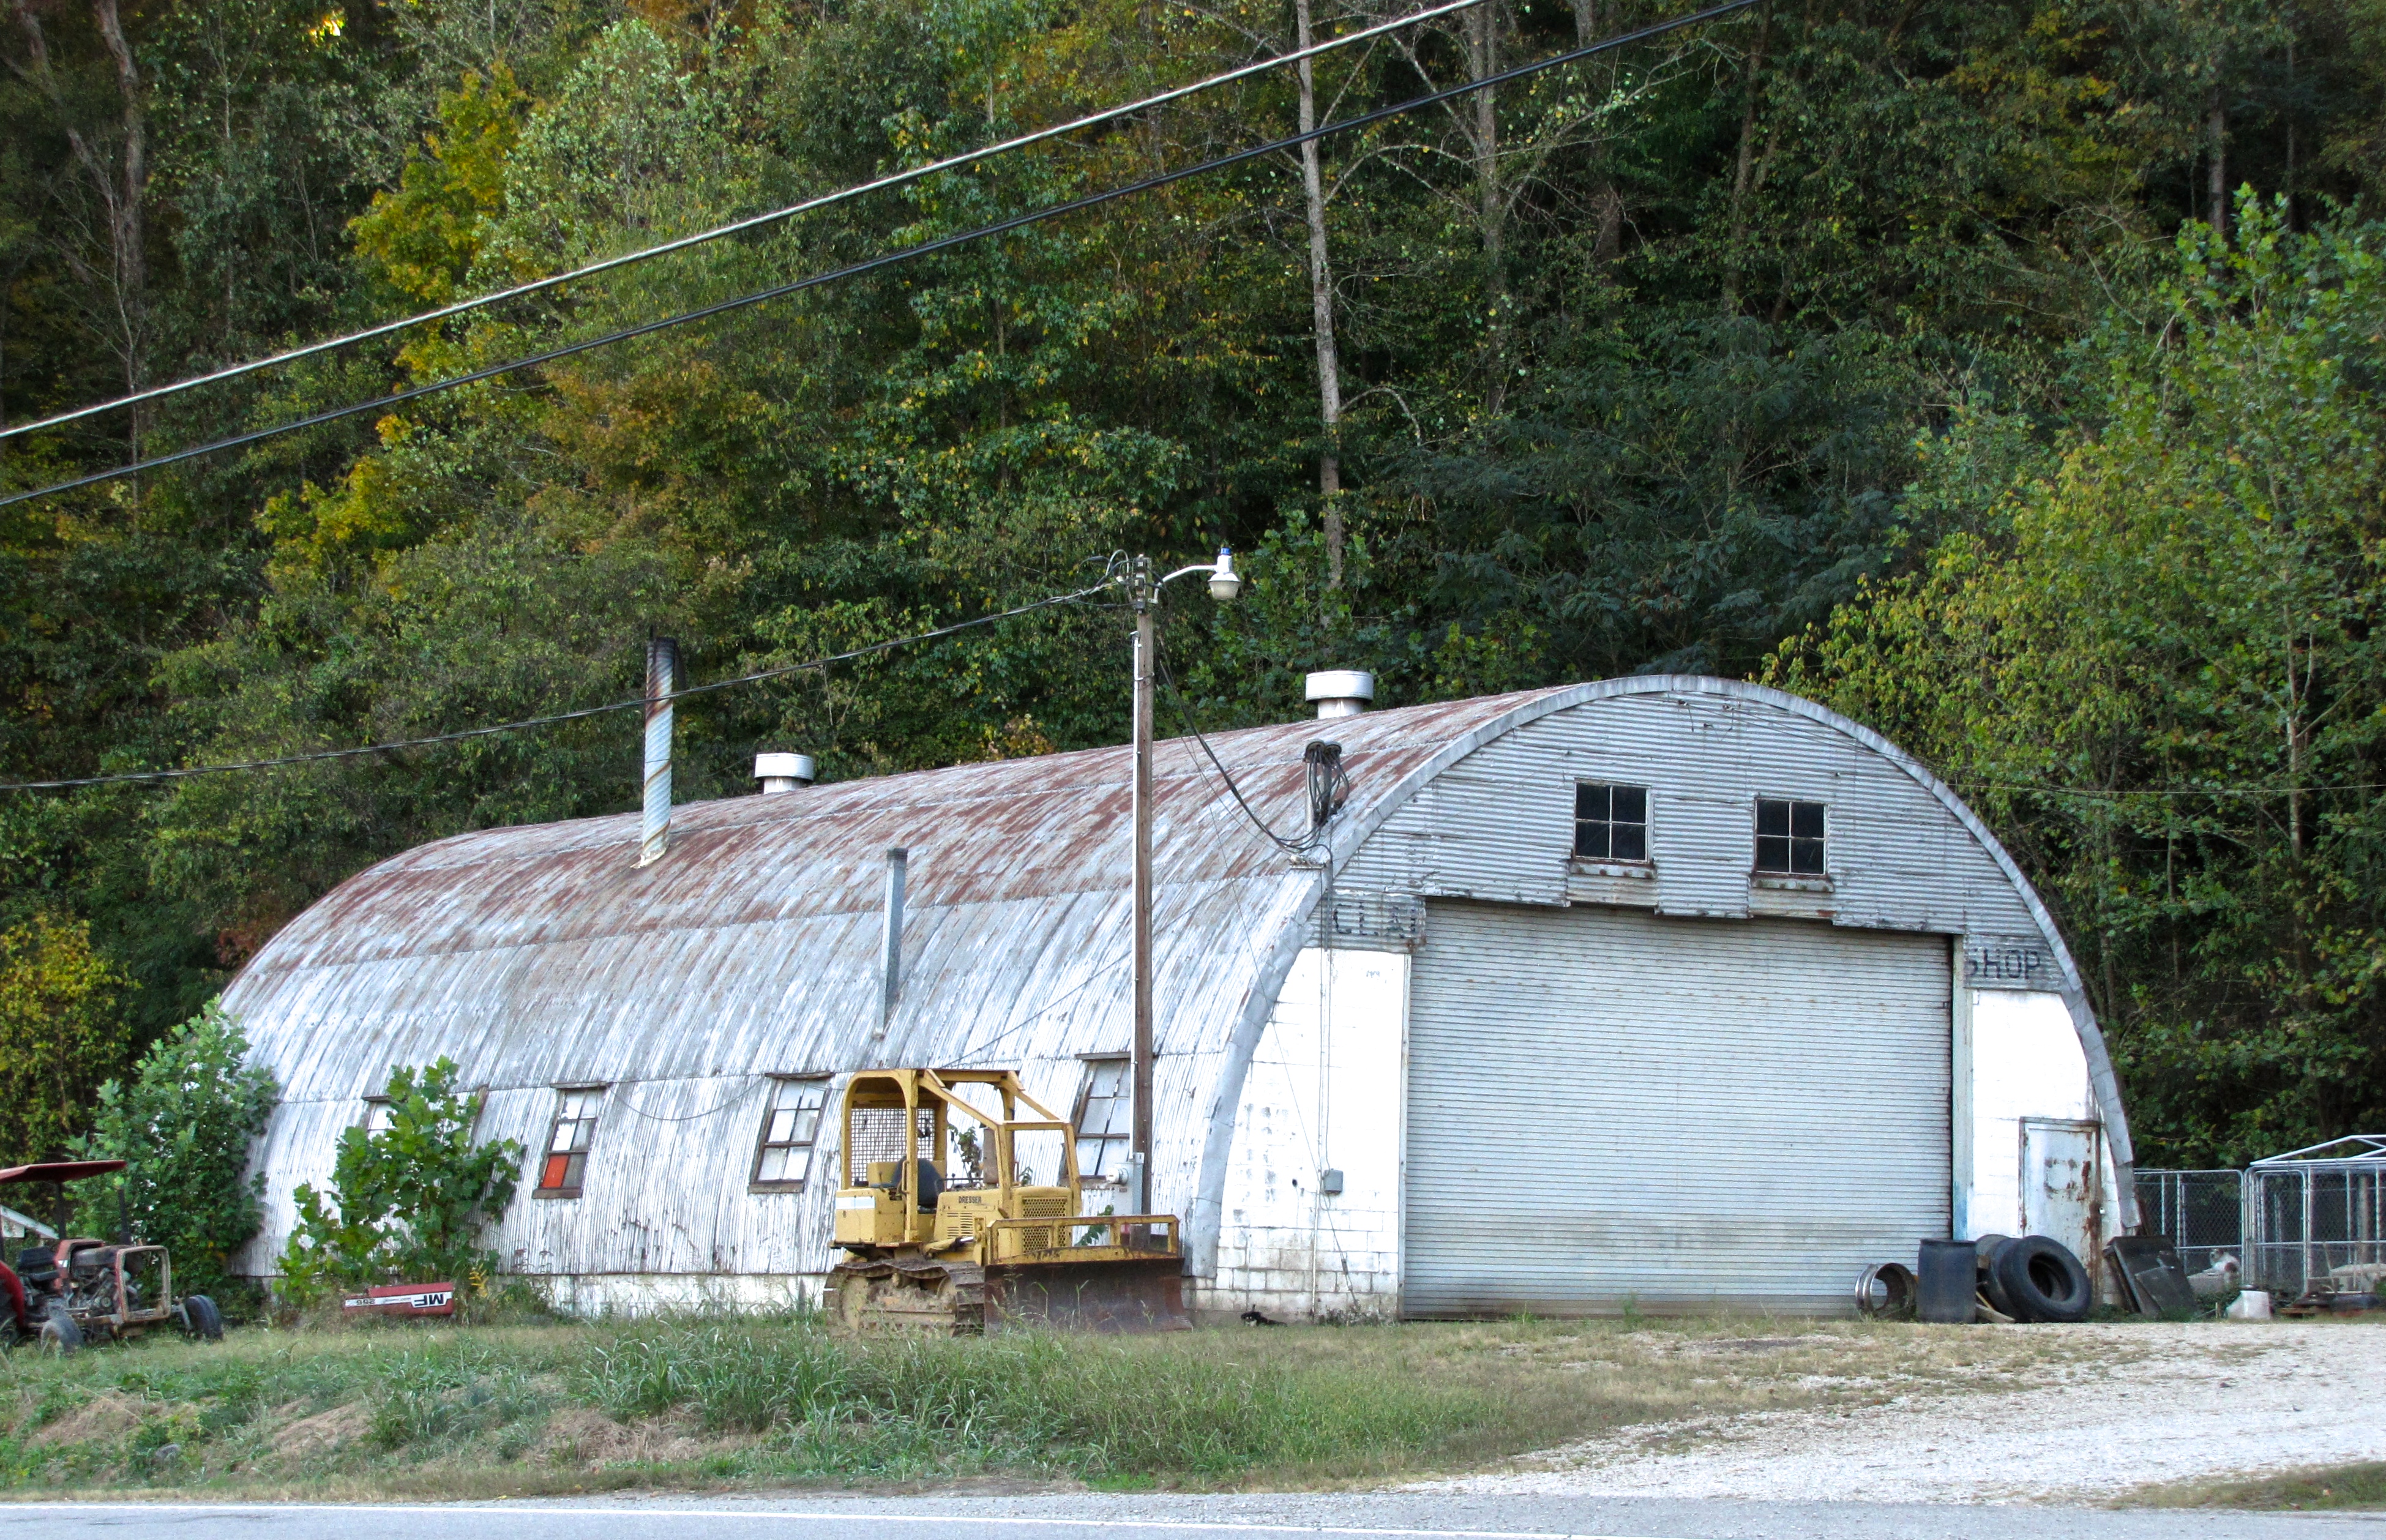 quonset hut in Loudon, NH